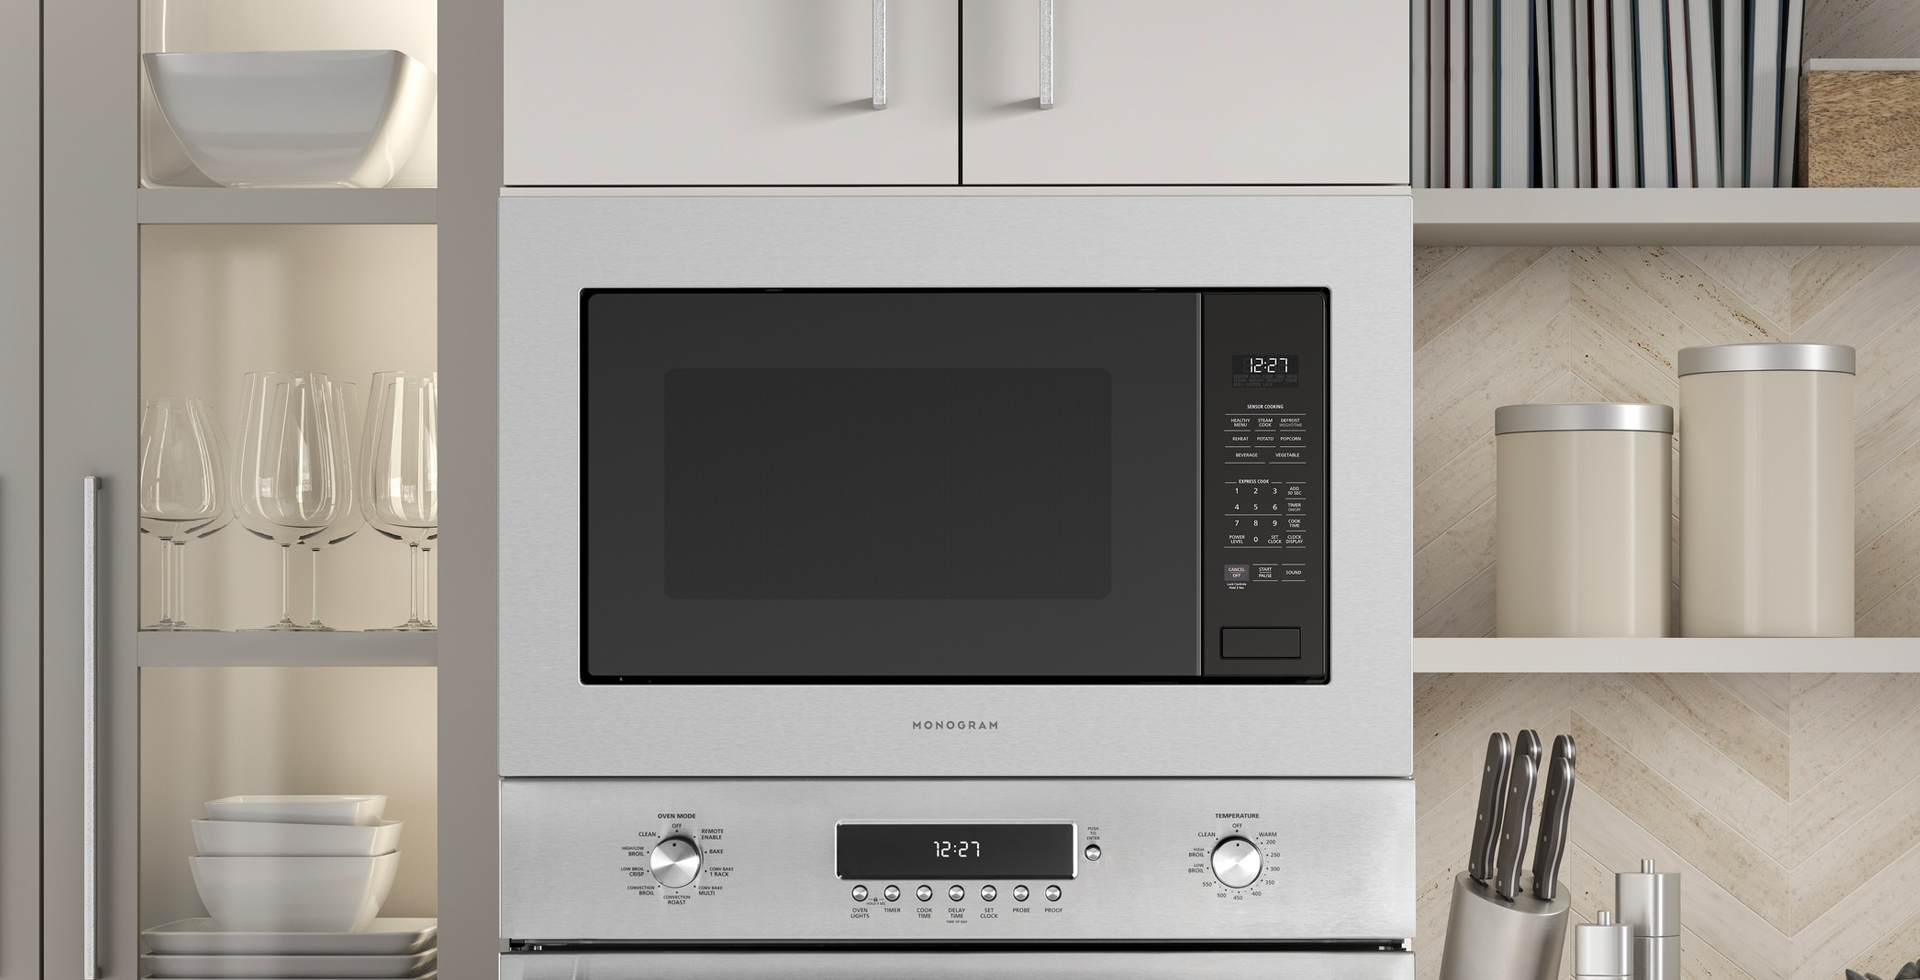 Built in & Countertop Microwave Ovens